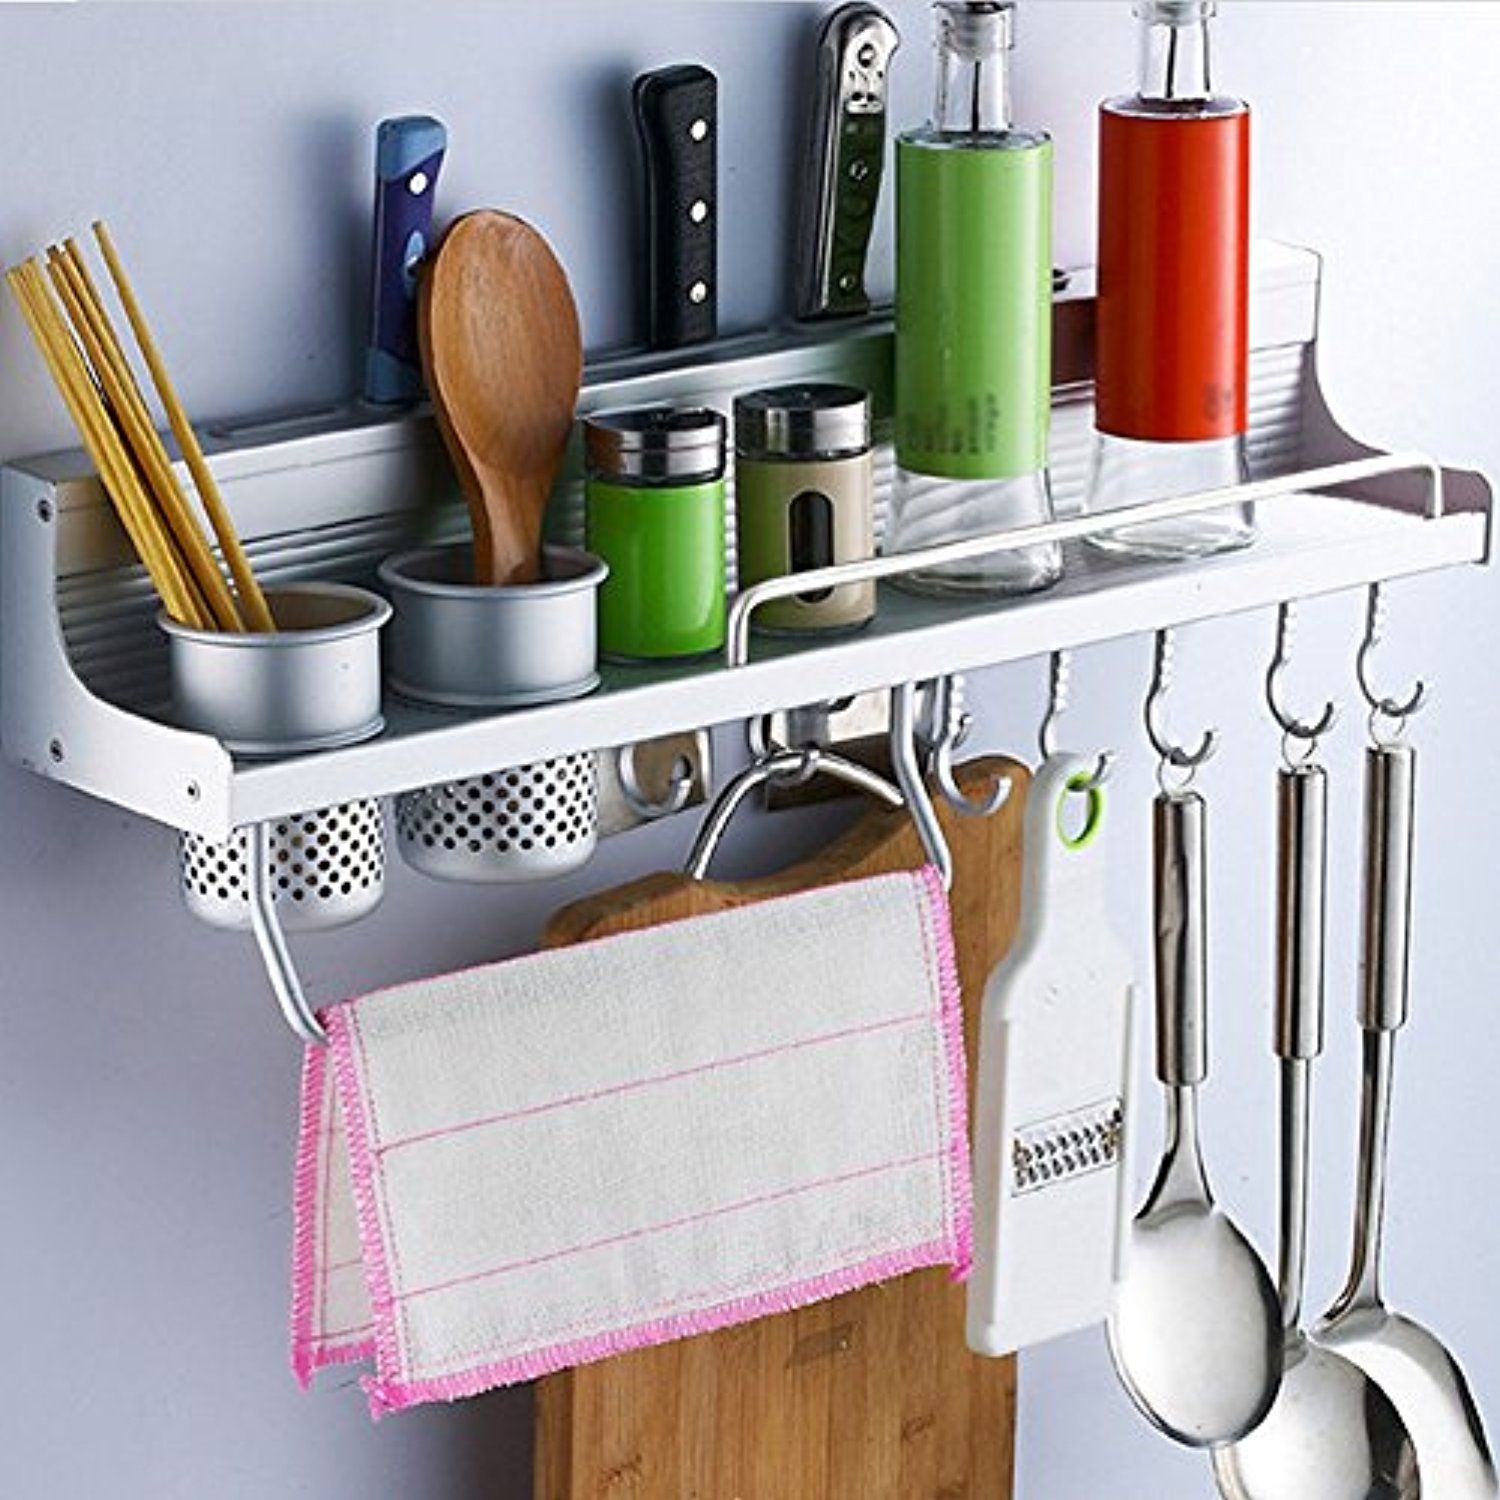 Wall Mounted Kitchen Shelves Visualhunt, Kitchen Shelves With Hooks